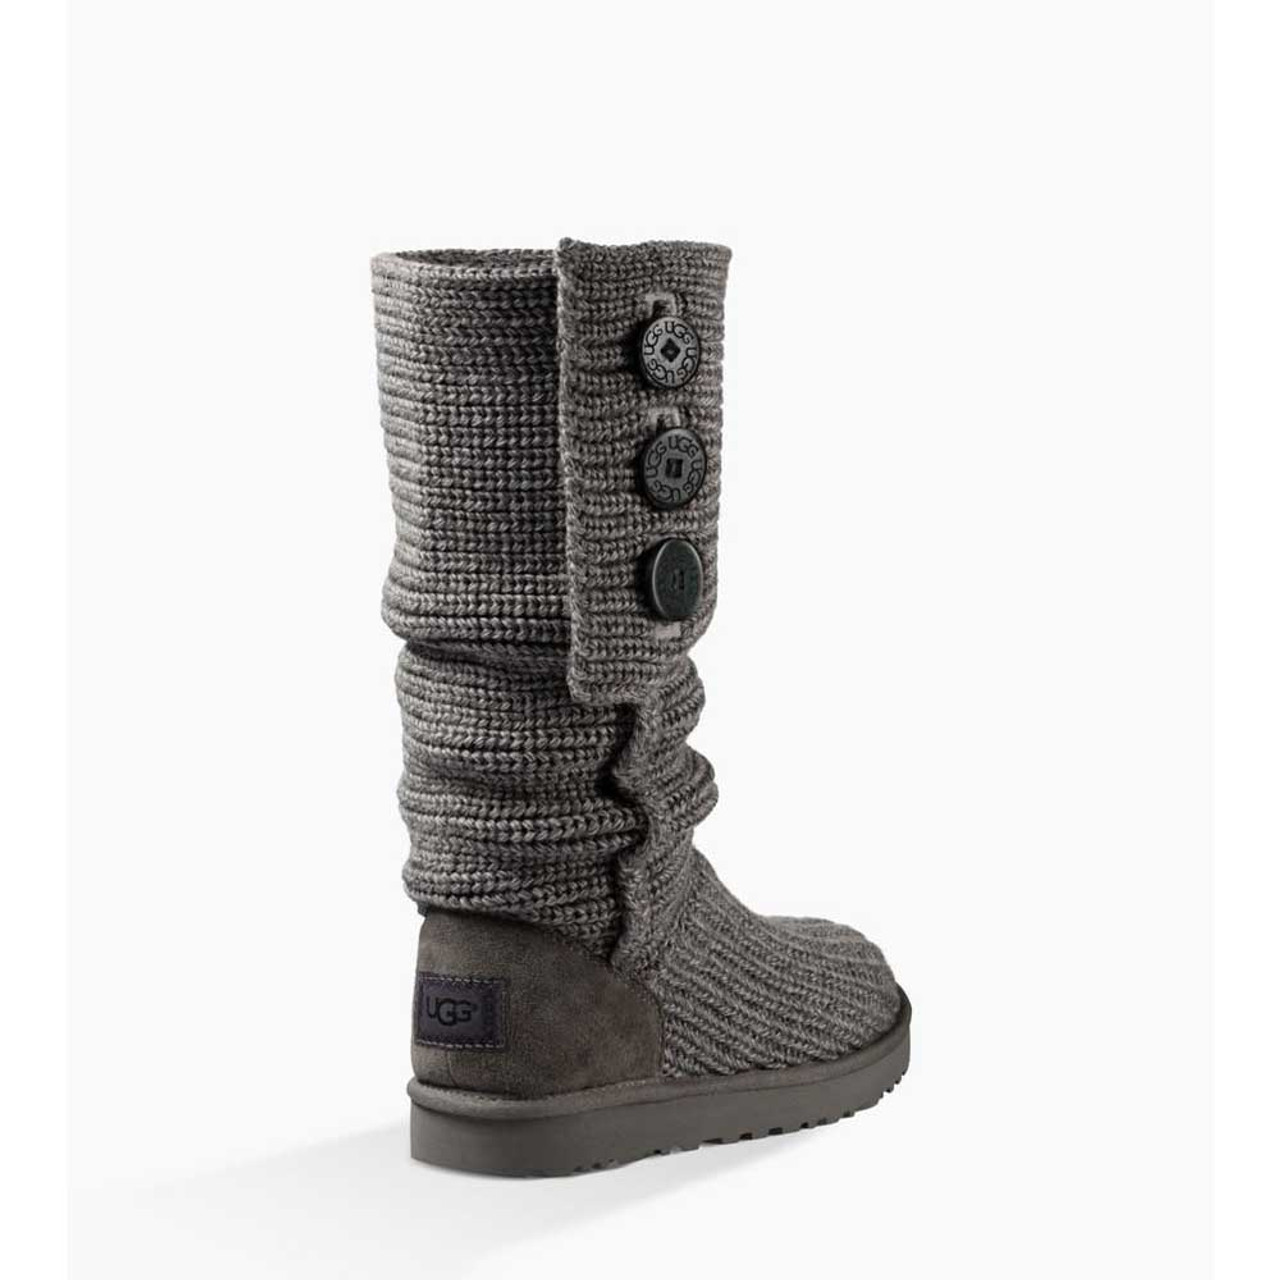 Ugg Women's Classic Cardy Boots $ 149.99 | TYLER'S